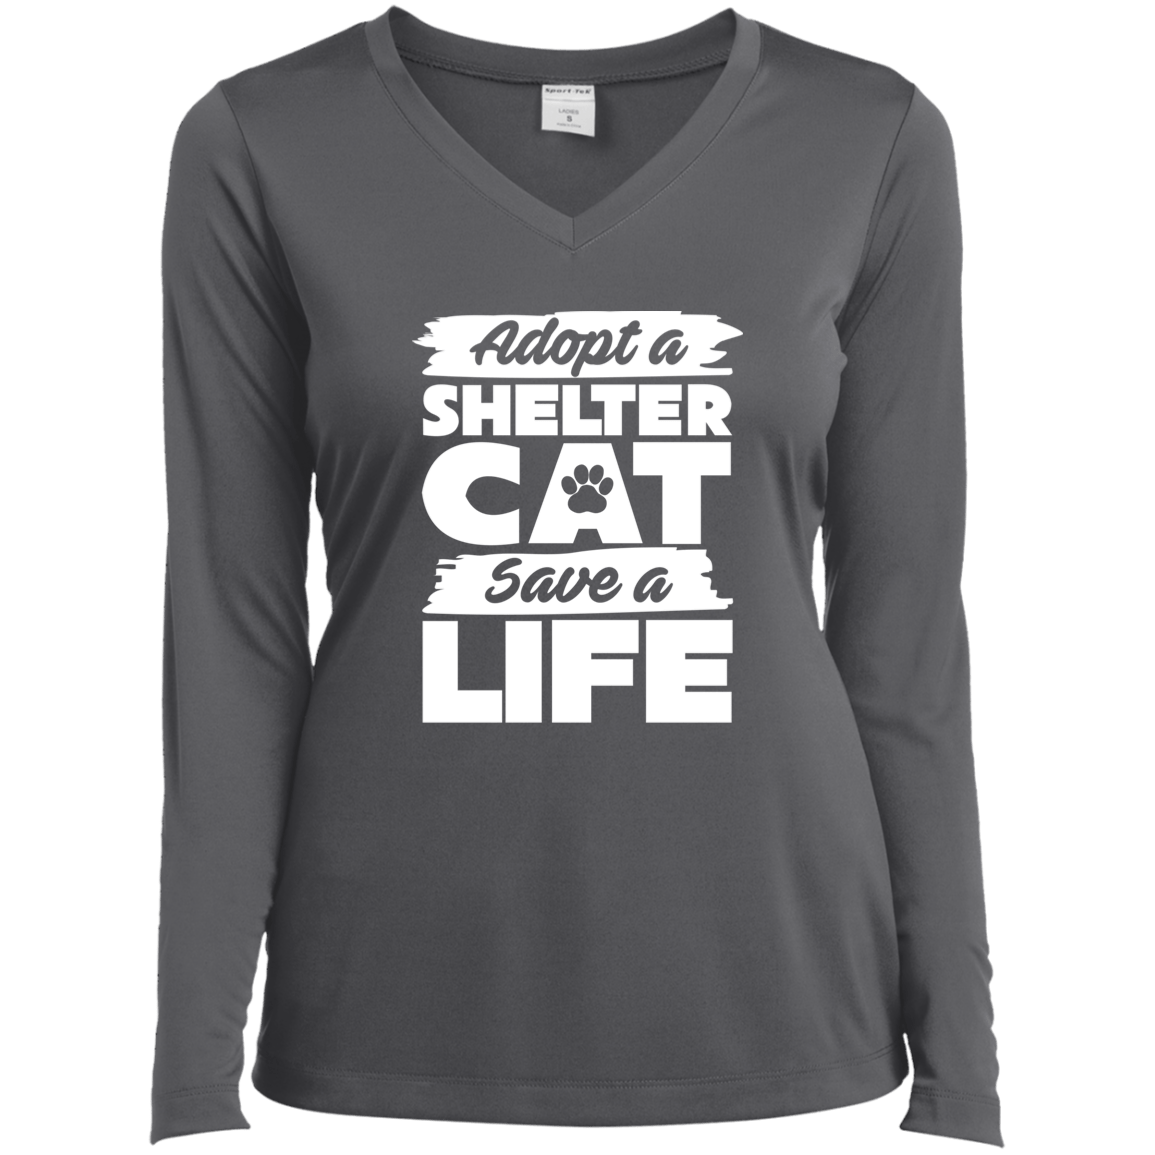 Adopt A Shelter Cat - Long Sleeve Ladies V Neck.